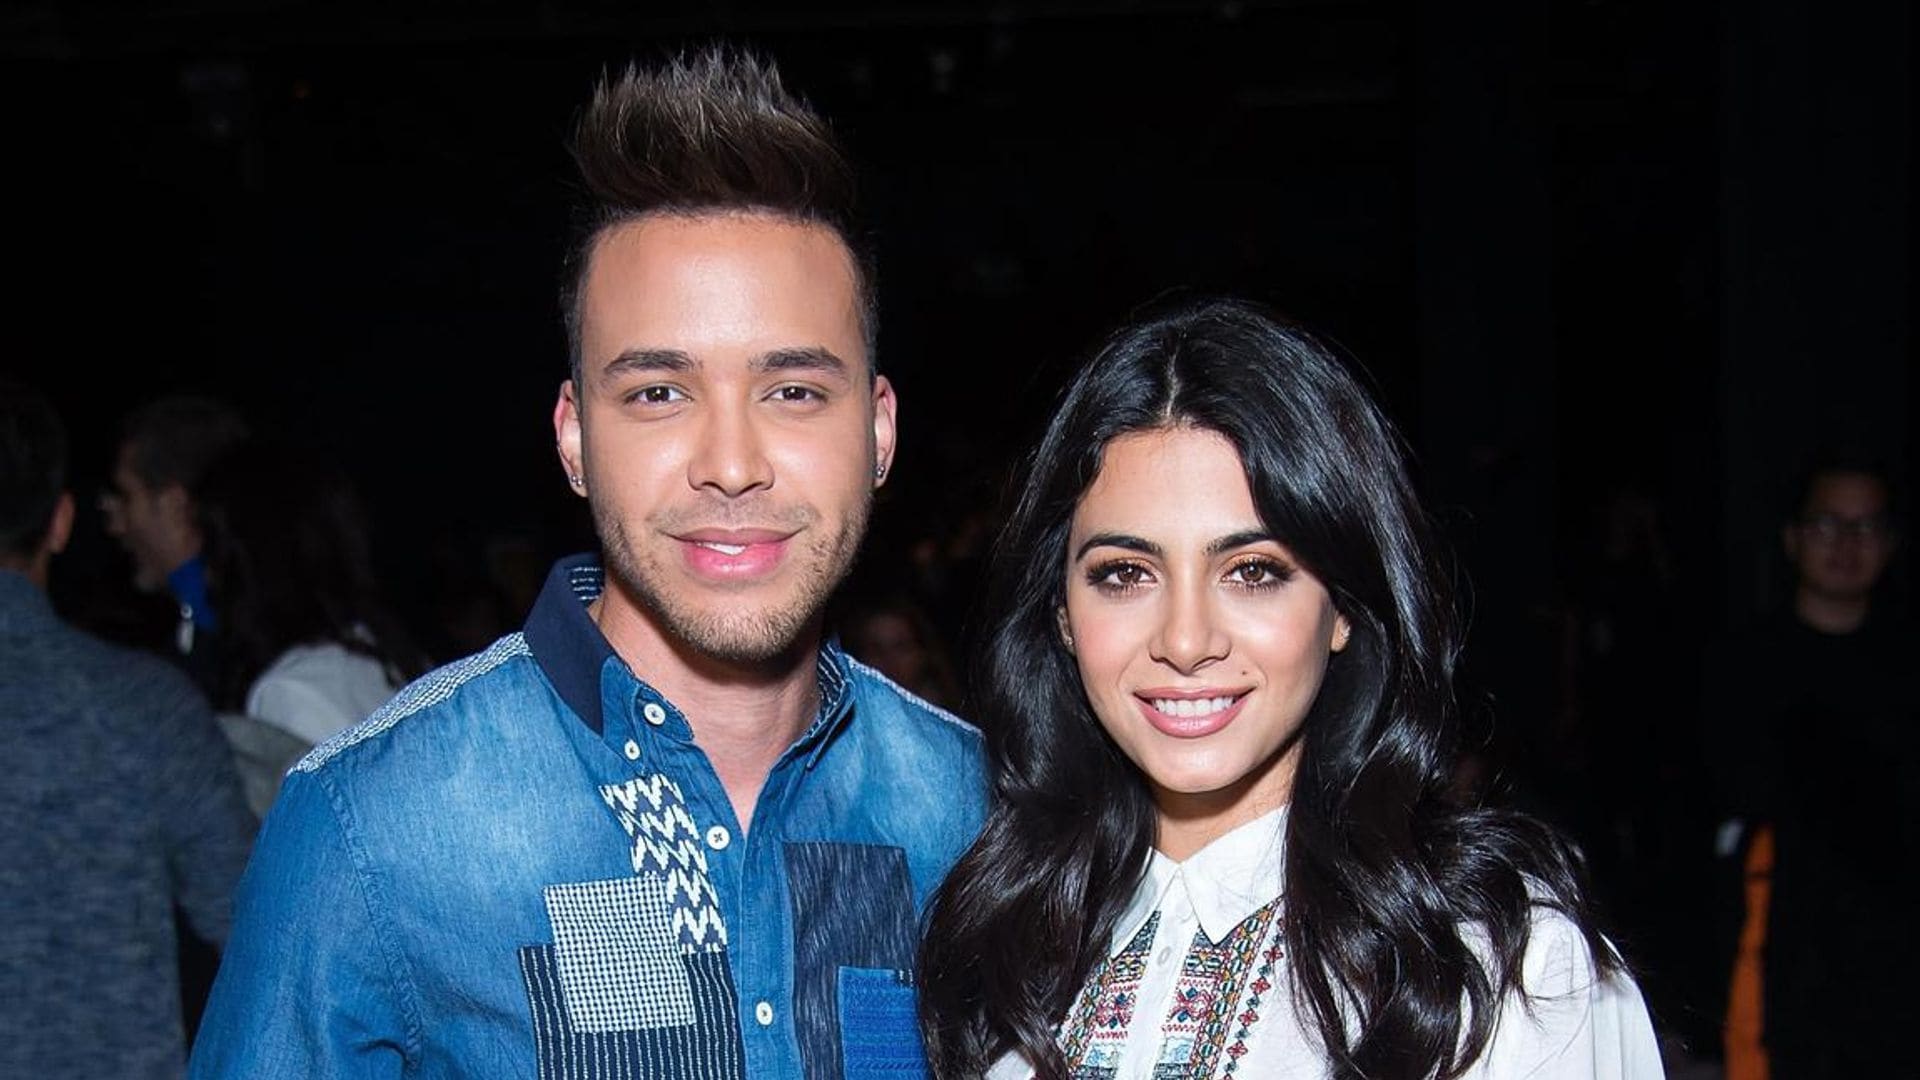 Tik Tok viral challenge: From Prince Royce, Jlo and Camila Cabello, these celebrities are changing roles with the ‘Flip the Switch’ craze